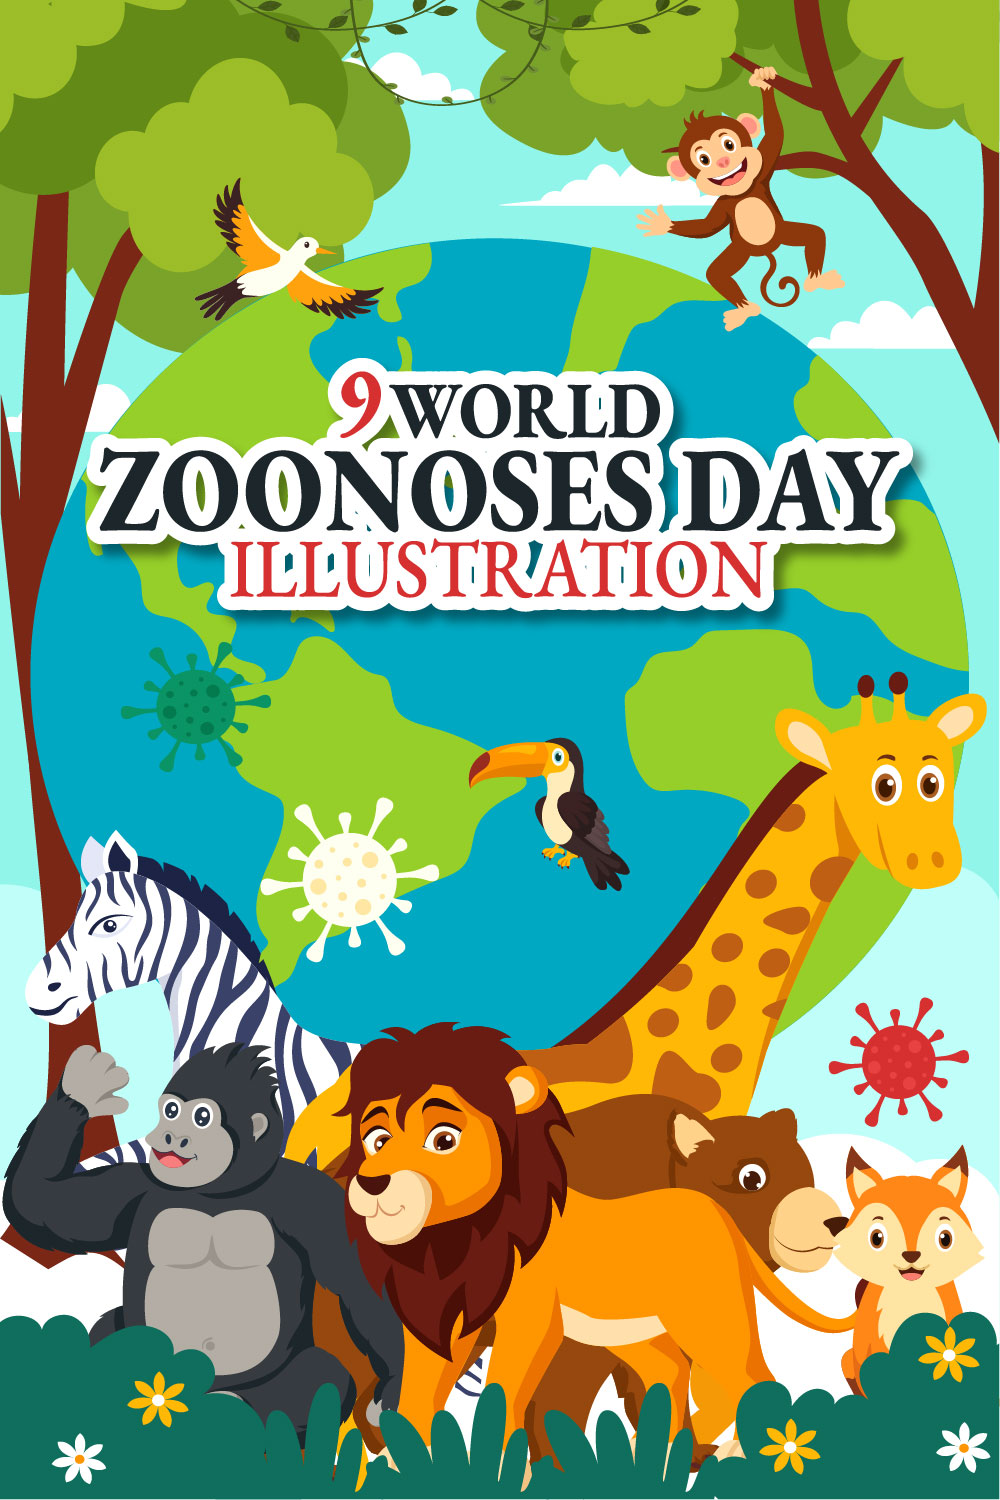 9 World Zoonoses Day Illustration pinterest preview image.